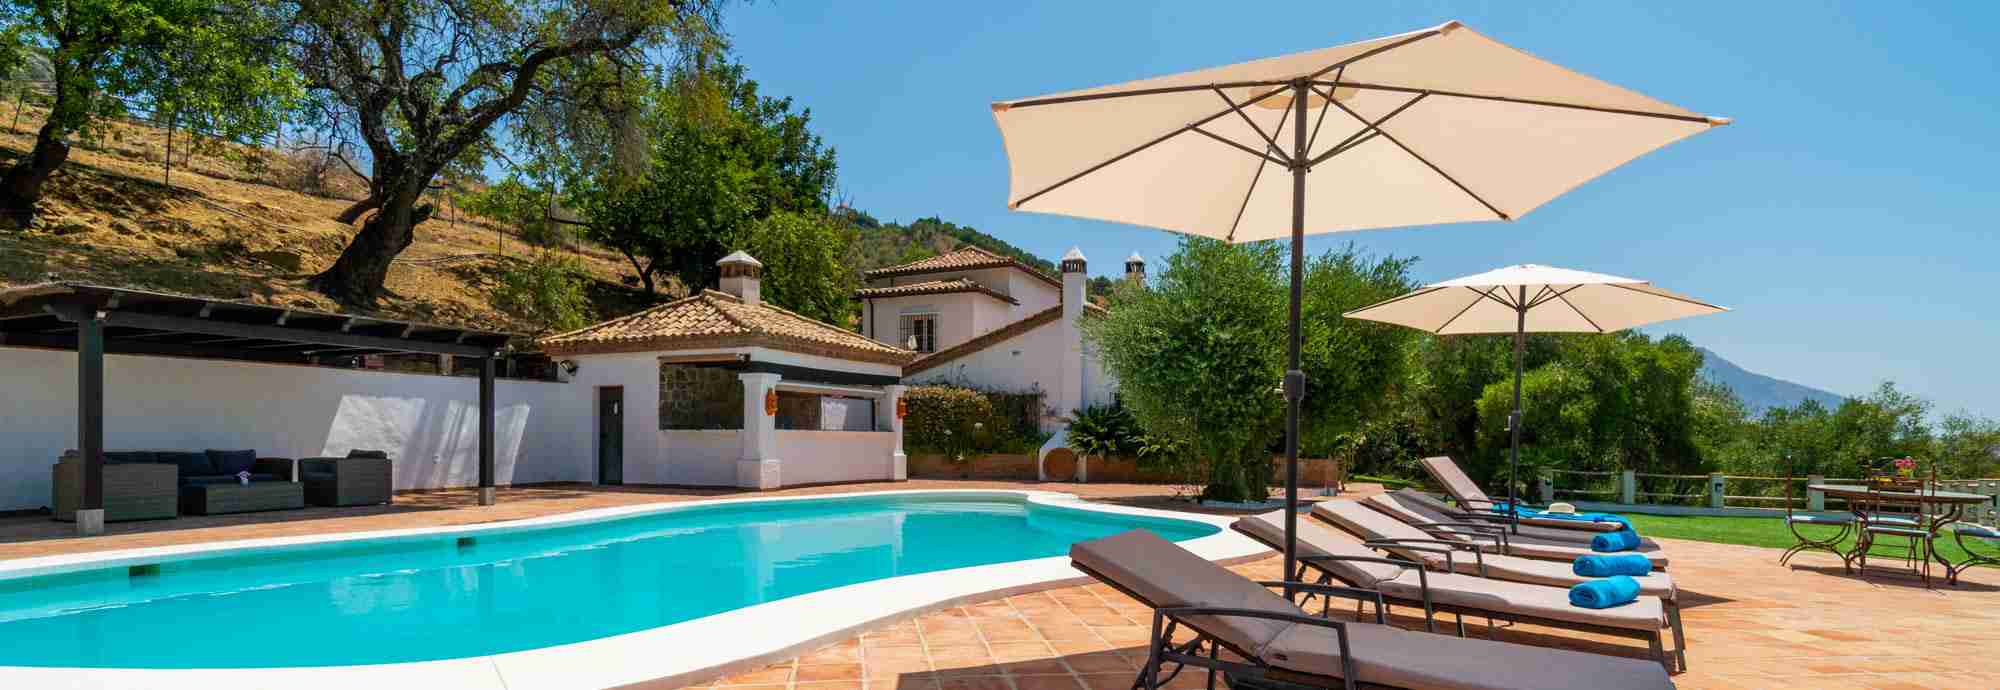 The family favourite: an Andalucia villa with plenty for everyone